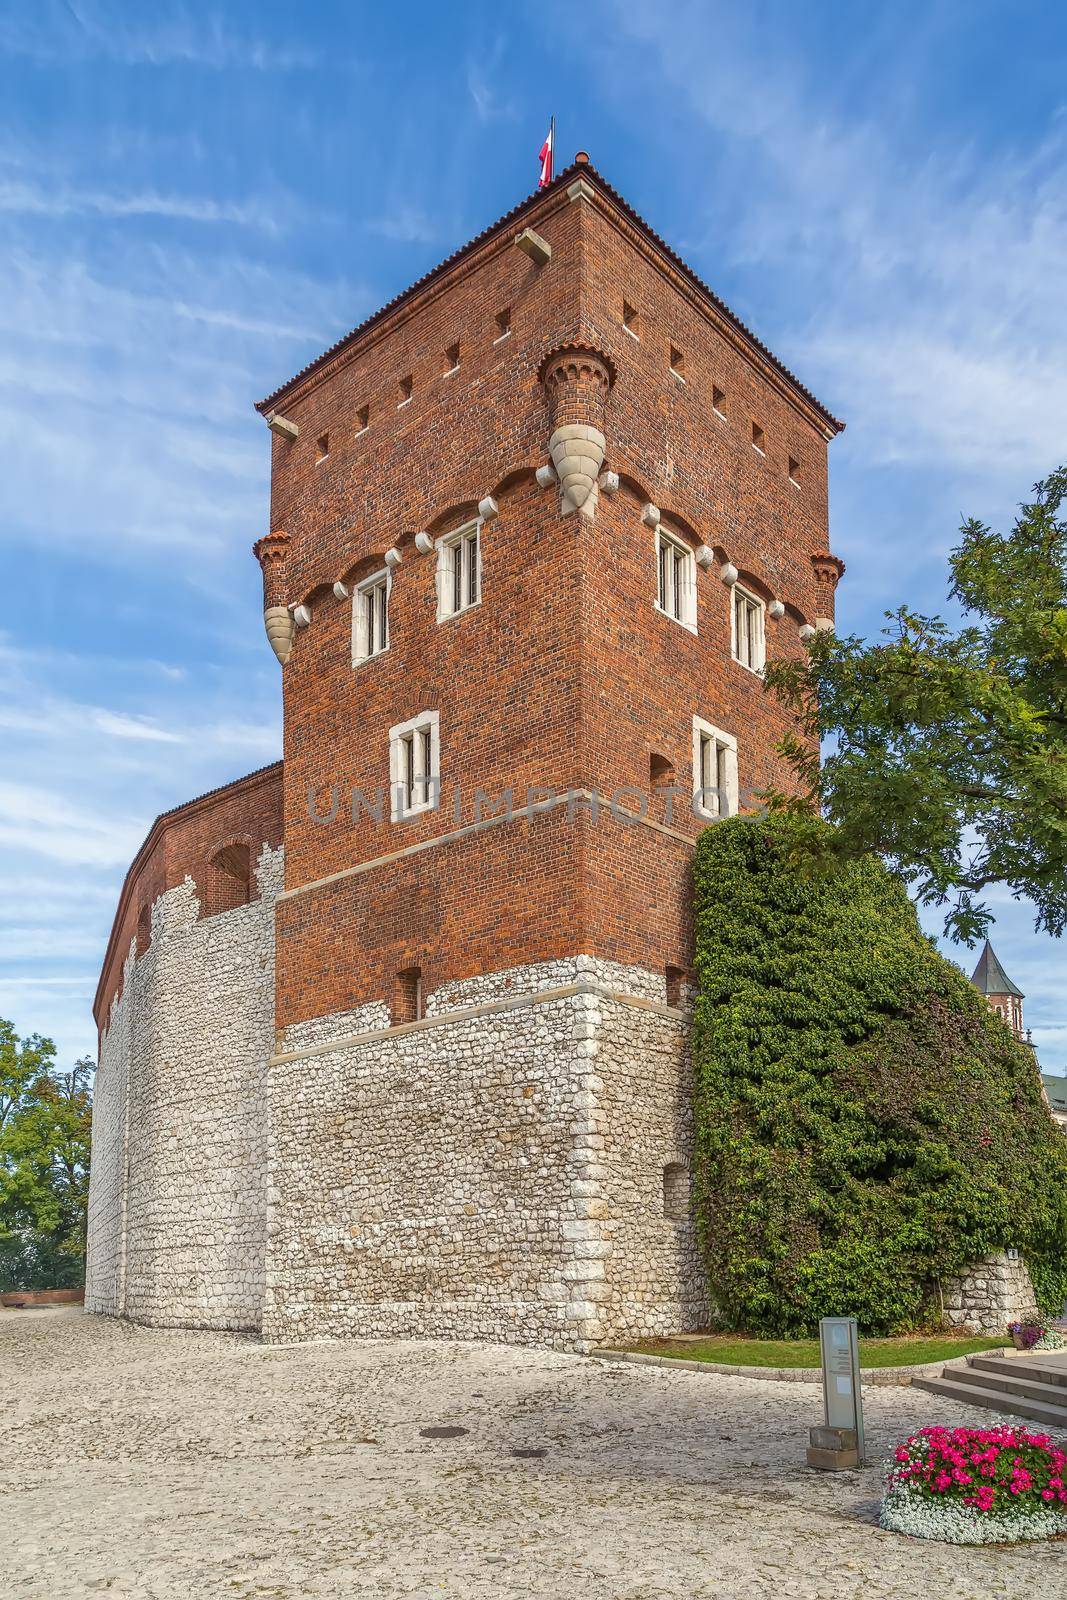 Thieves' Tower was erected in the 14th century in Wawel Castle, Krakow, Poland